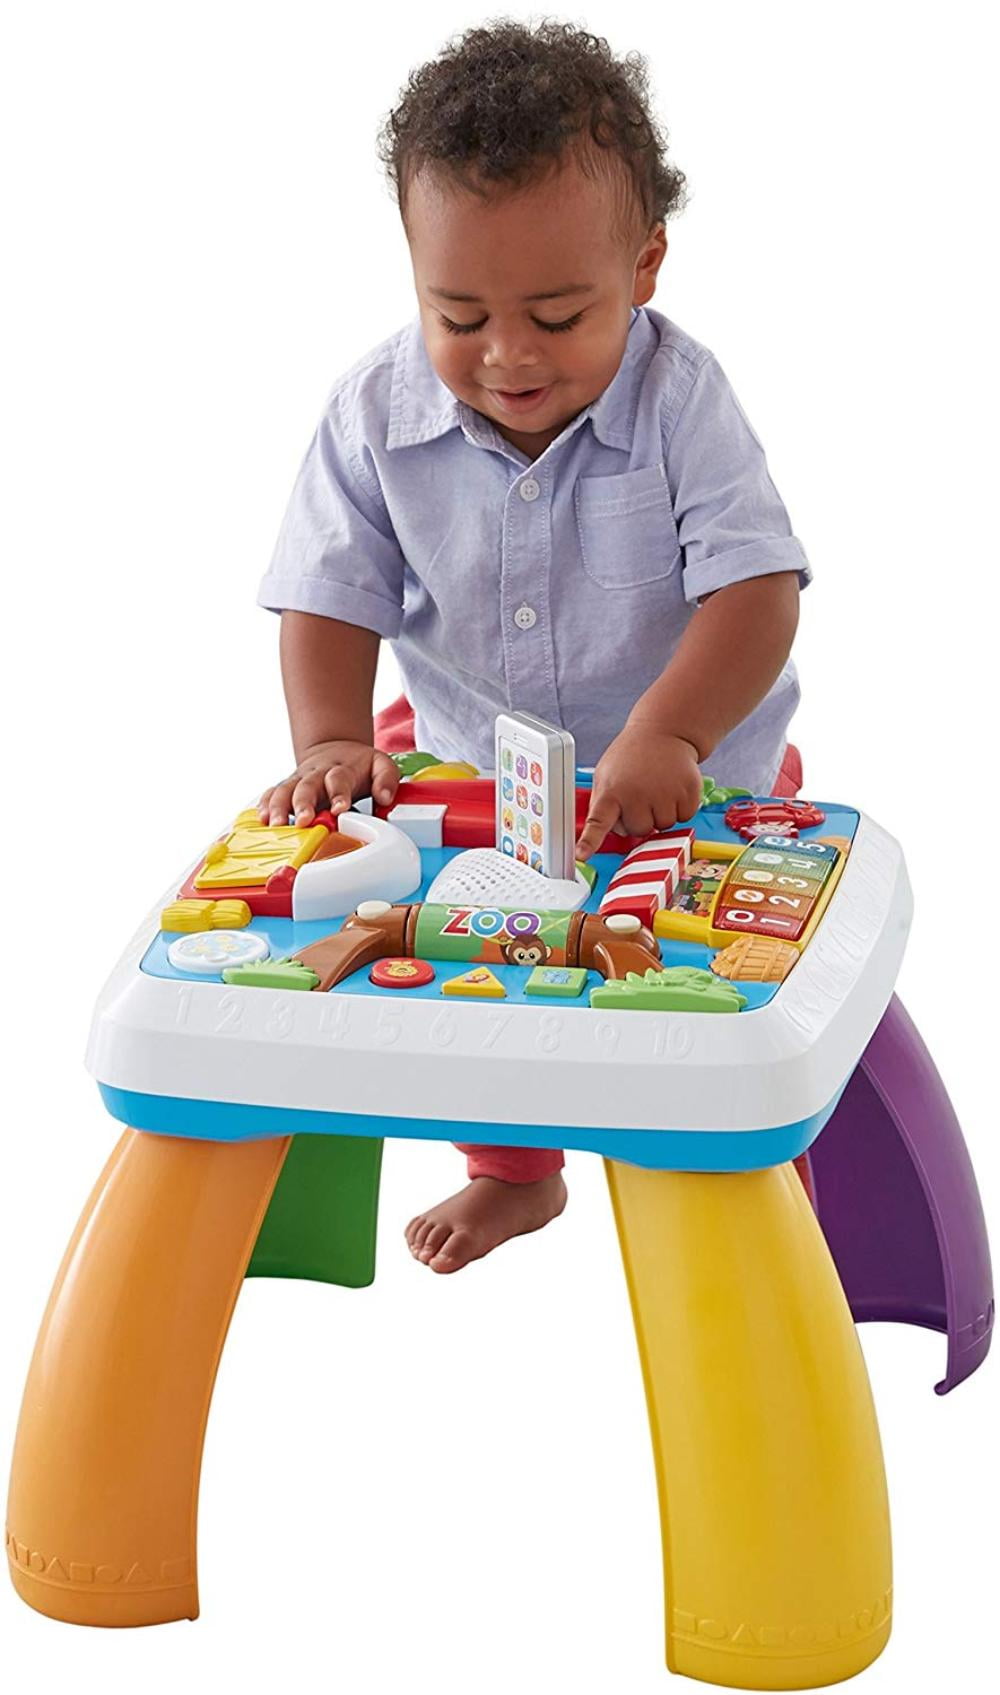 Fisher-Price Laugh & Learn Around the Town Learning Table